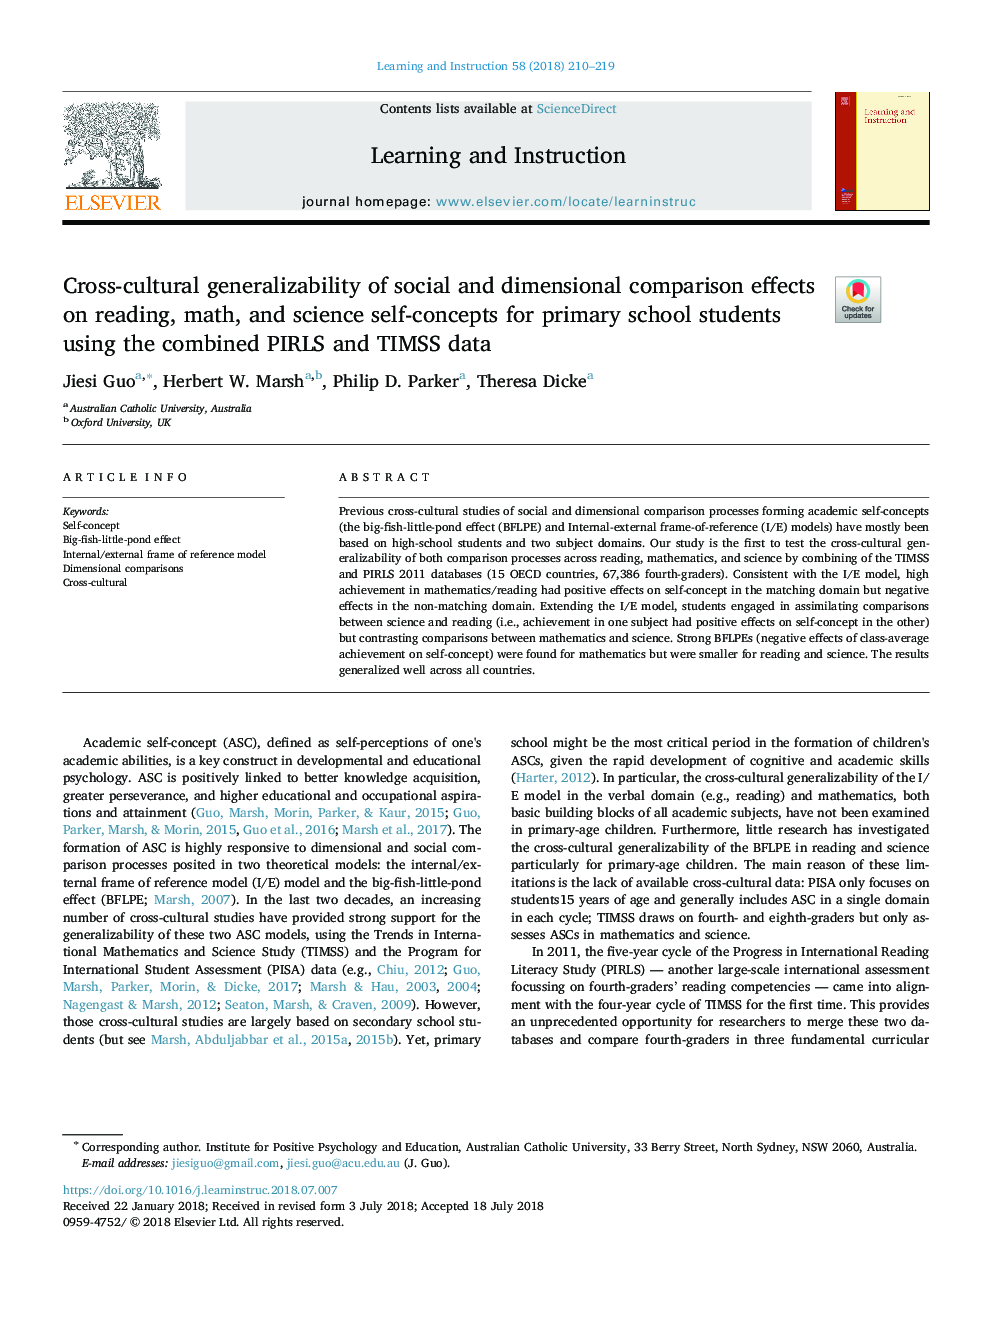 Cross-cultural generalizability of social and dimensional comparison effects on reading, math, and science self-concepts for primary school students using the combined PIRLS and TIMSS data